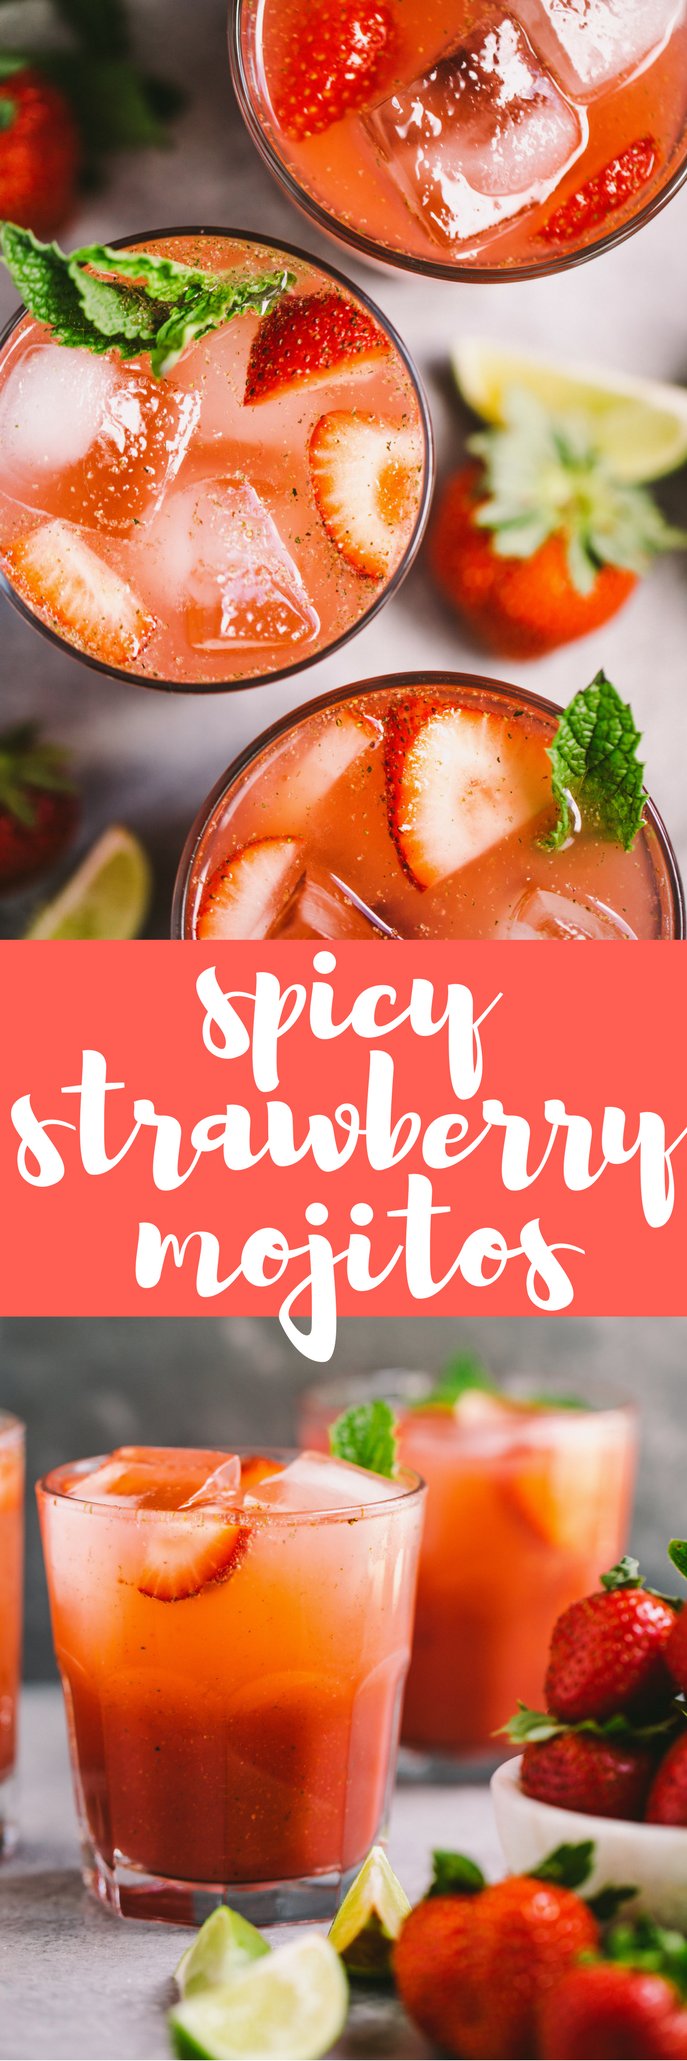 classic mojitos get a spicy strawberry twist in this easy cocktail recipe for spicy strawberry mojitos! fresh strawberries muddled with lime juice, mint, & spicy rum for the perfectly balanced spicy & sweet cocktails. these spicy strawberry mojitos will be your new favorite! #mojitos #easycocktail #cocktailrecipe #strawberrymojitos #spicystrawberrymojitos #playswellwithbutter